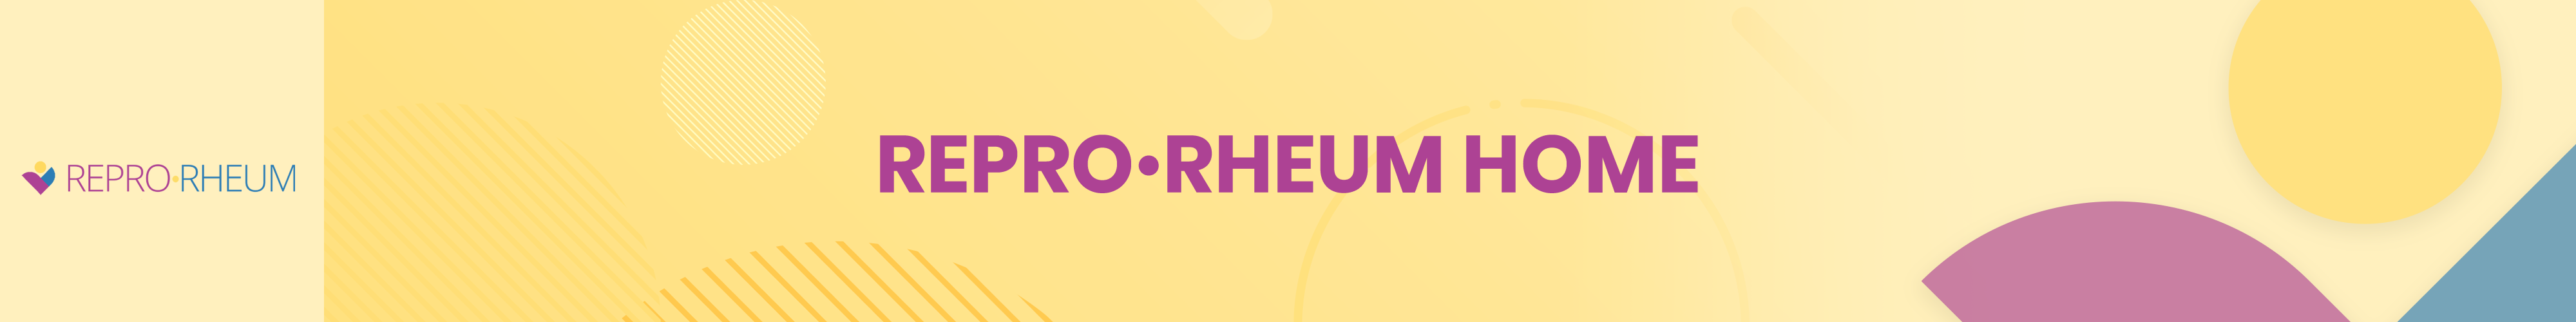 ReproRheum home page header